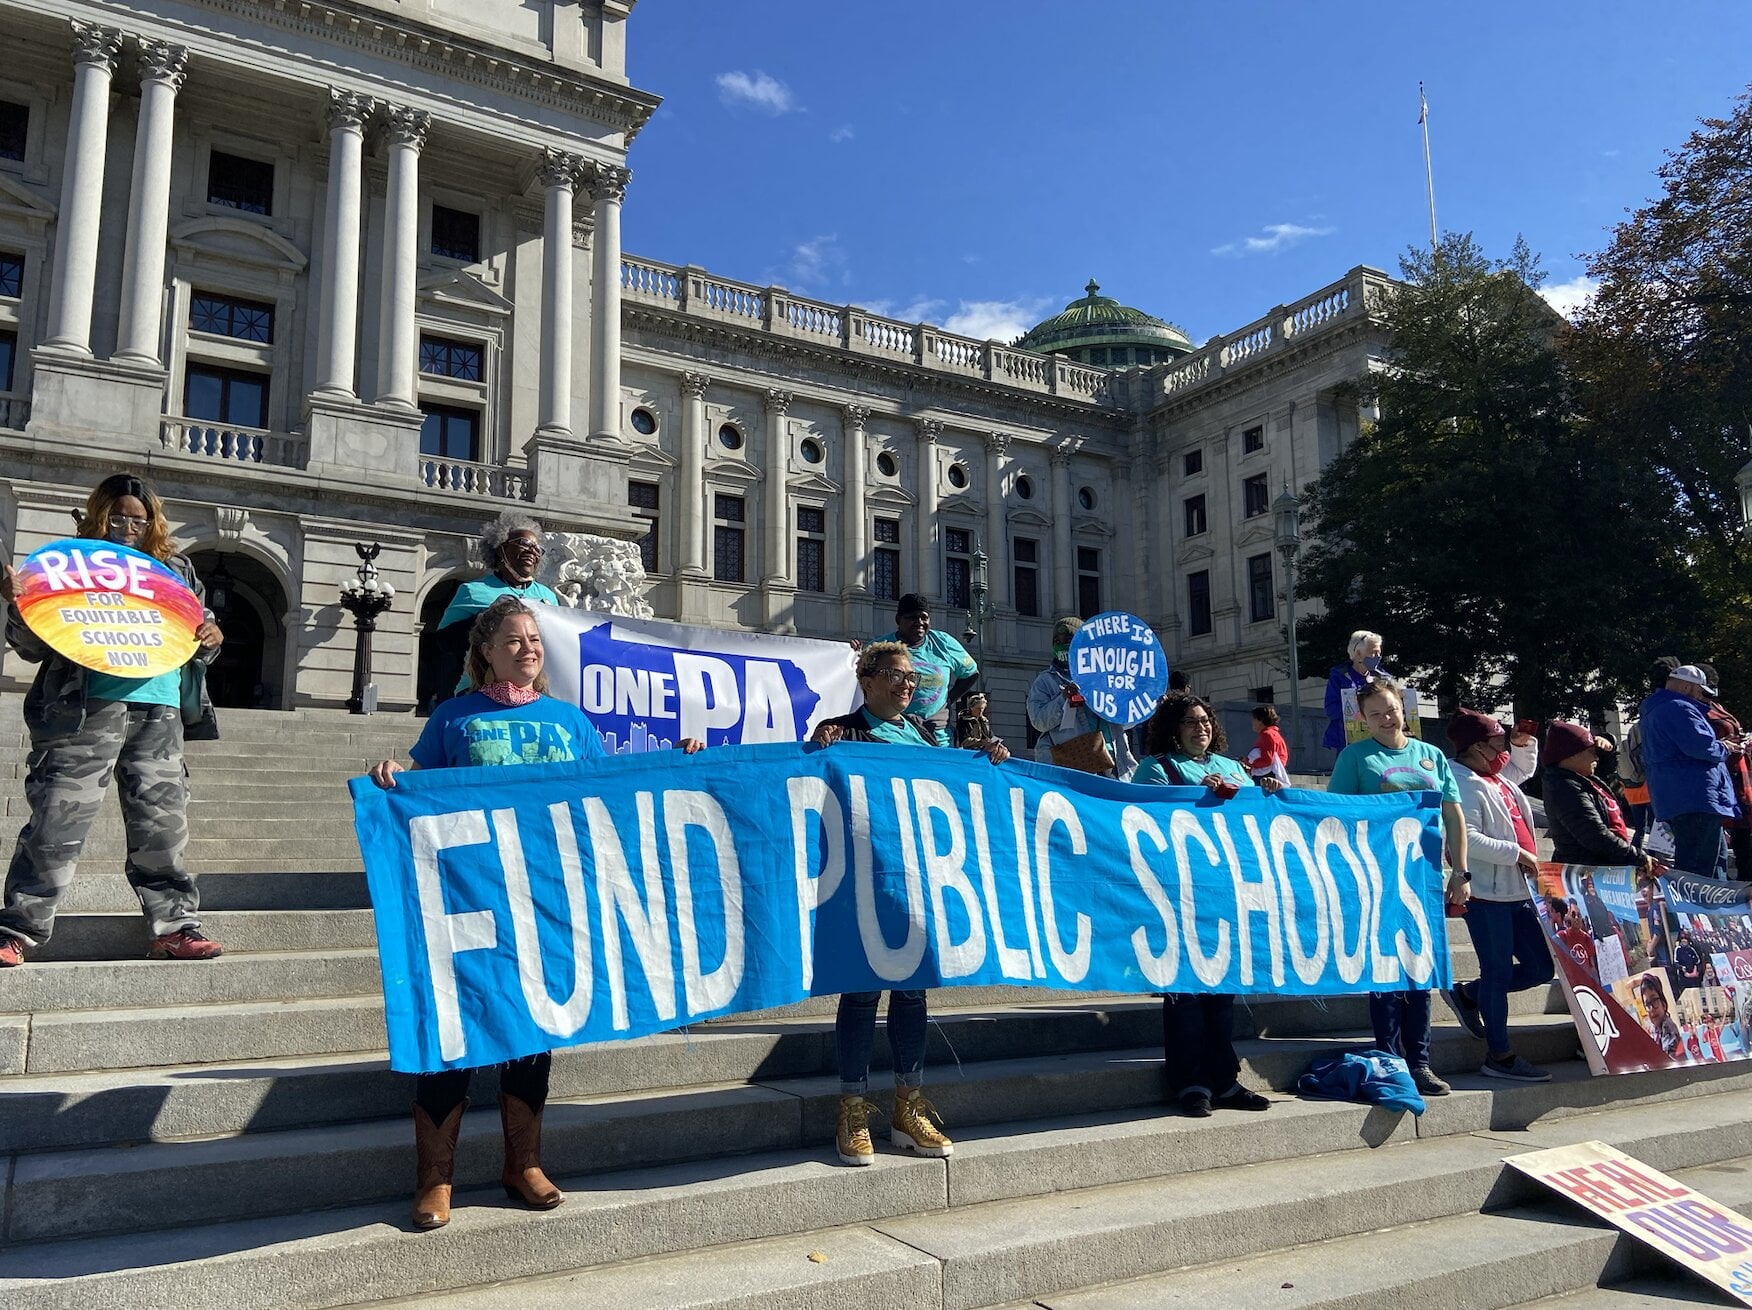 Fund Public Schools - Bucks County Beacon - Lawmakers Look for Answers to Fix Pennsylvania’s Unconstitutional School Funding System